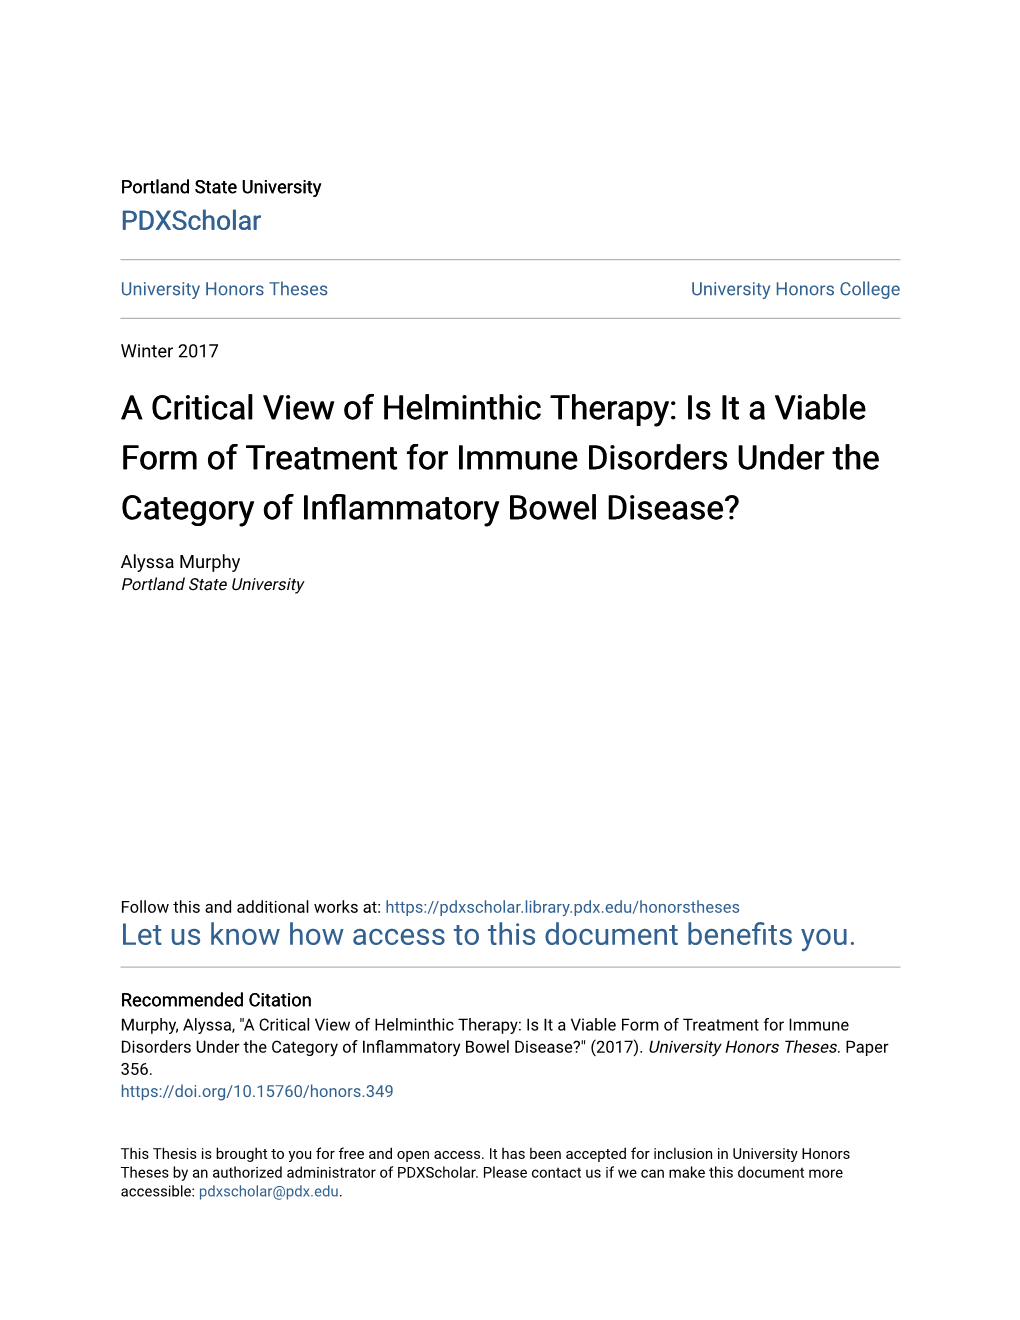 A Critical View of Helminthic Therapy: Is It a Viable Form of Treatment for Immune Disorders Under the Category of Inflammatory Bowel Disease?